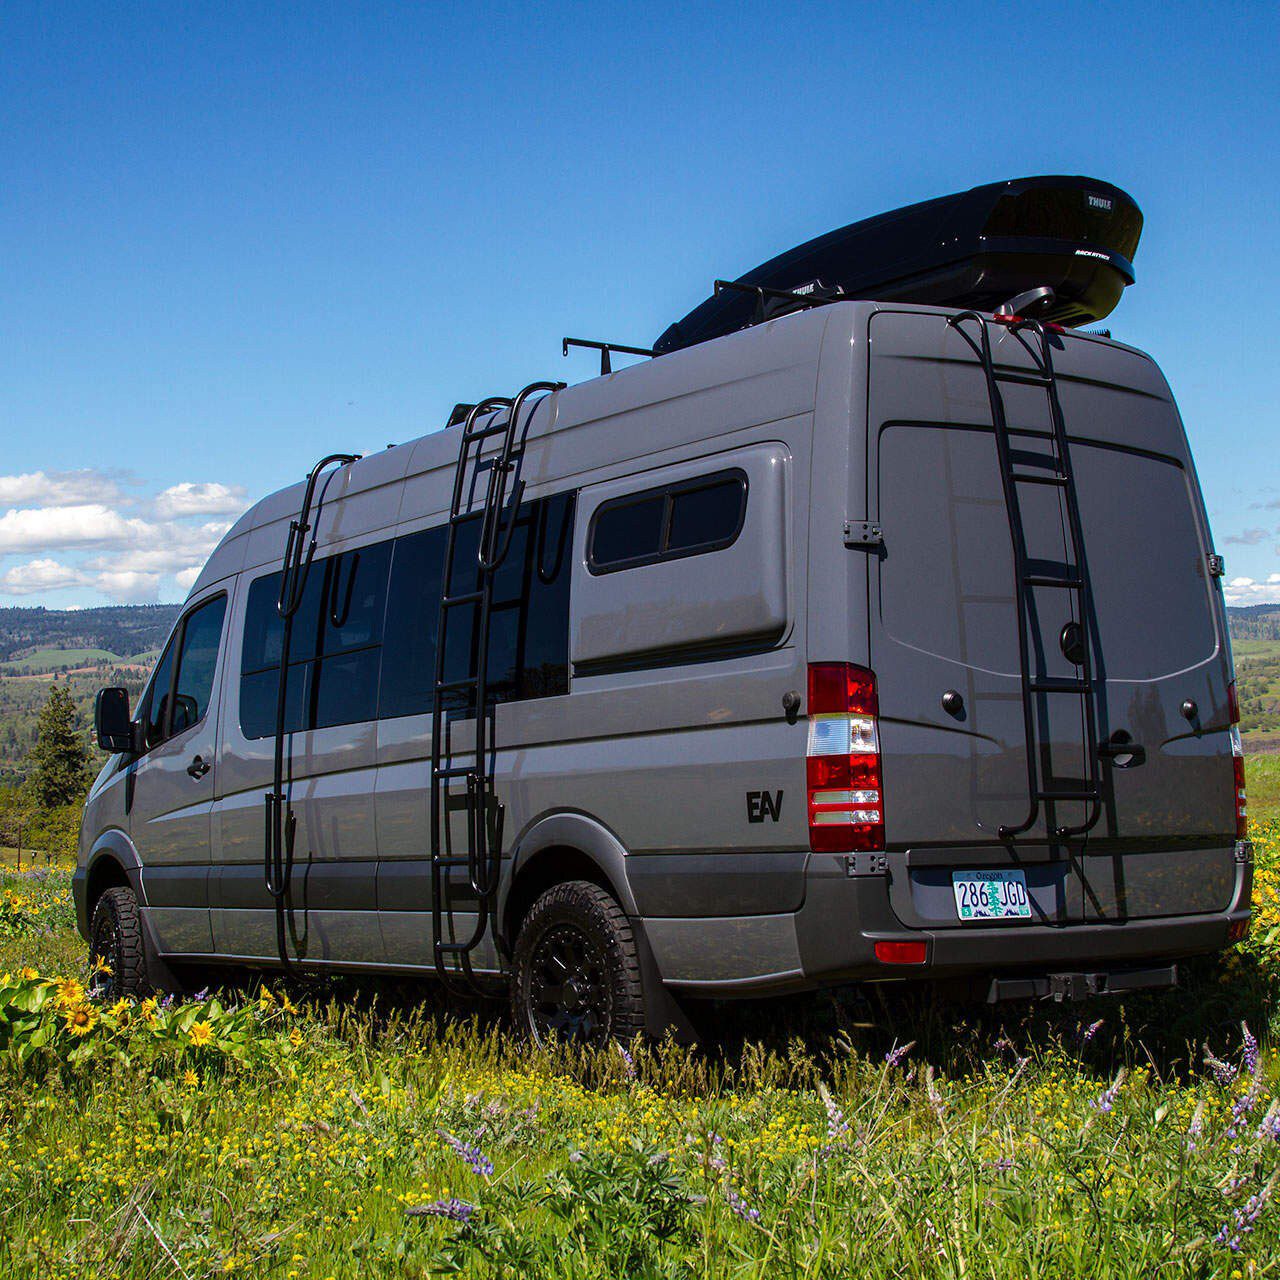 Sprinter Camper Van With Slide Out | escapeauthority.com